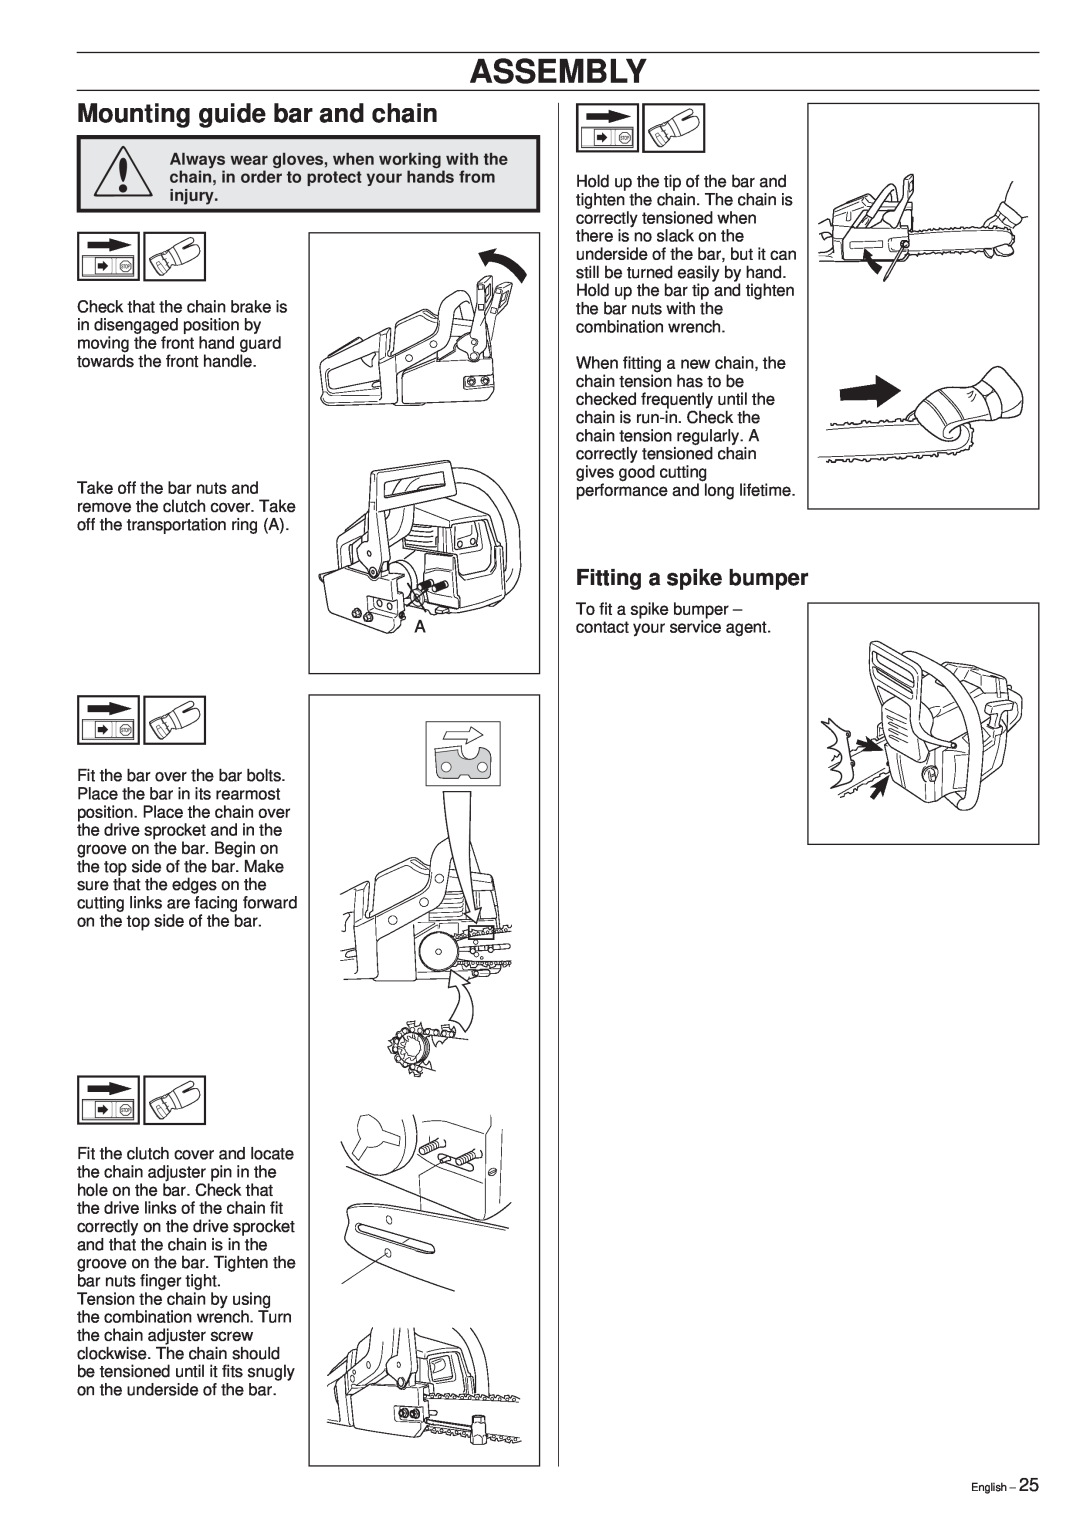 Husqvarna 40 manual Assembly, Mounting guide bar and chain, Fitting a spike bumper 